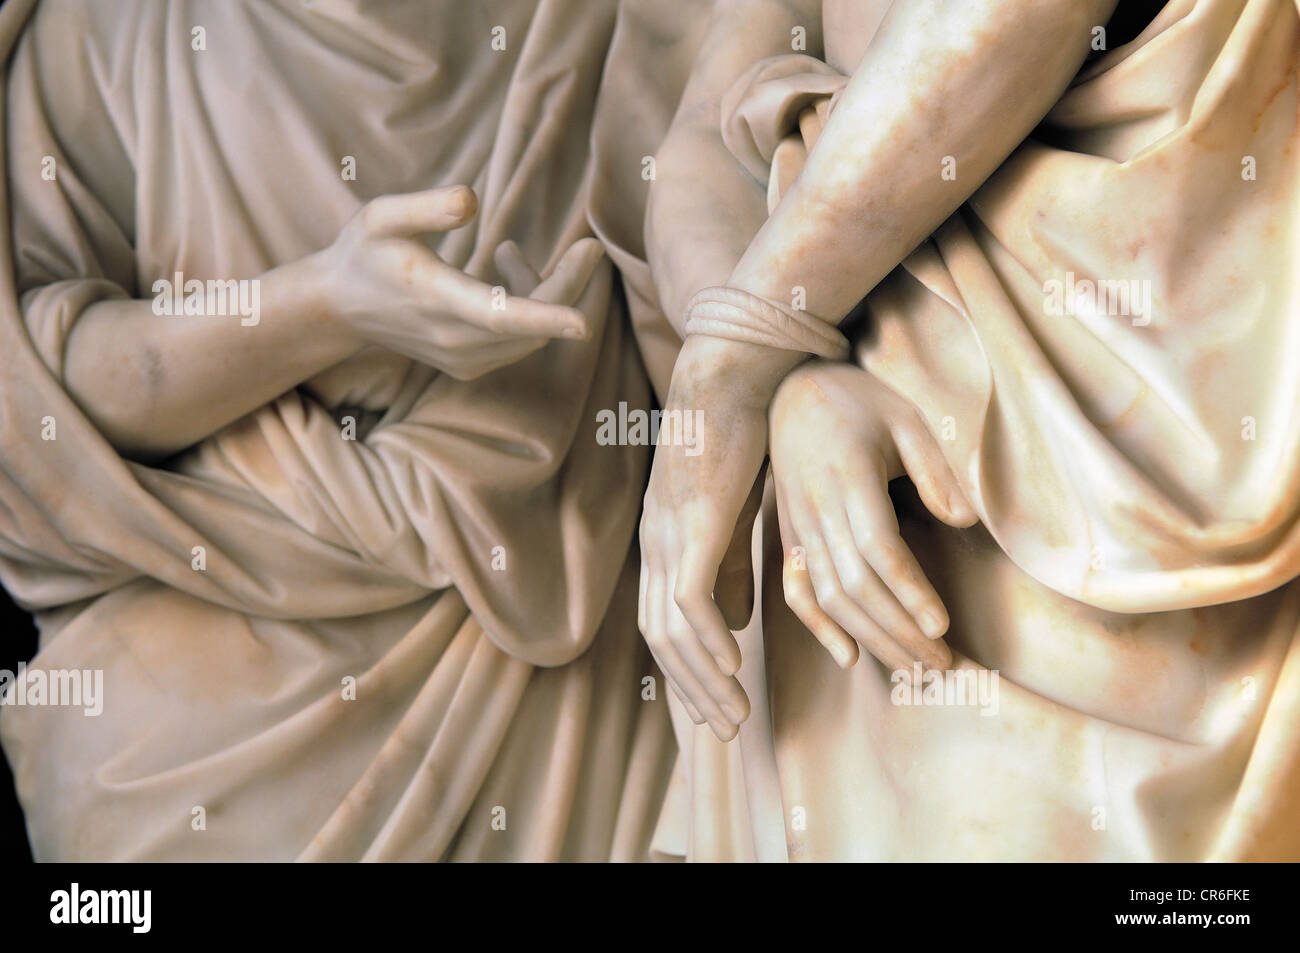 Jesus with his hands tied, detailed view of statues, Lateran Palace, Rome, Lazio region, Italy, Europe Stock Photo